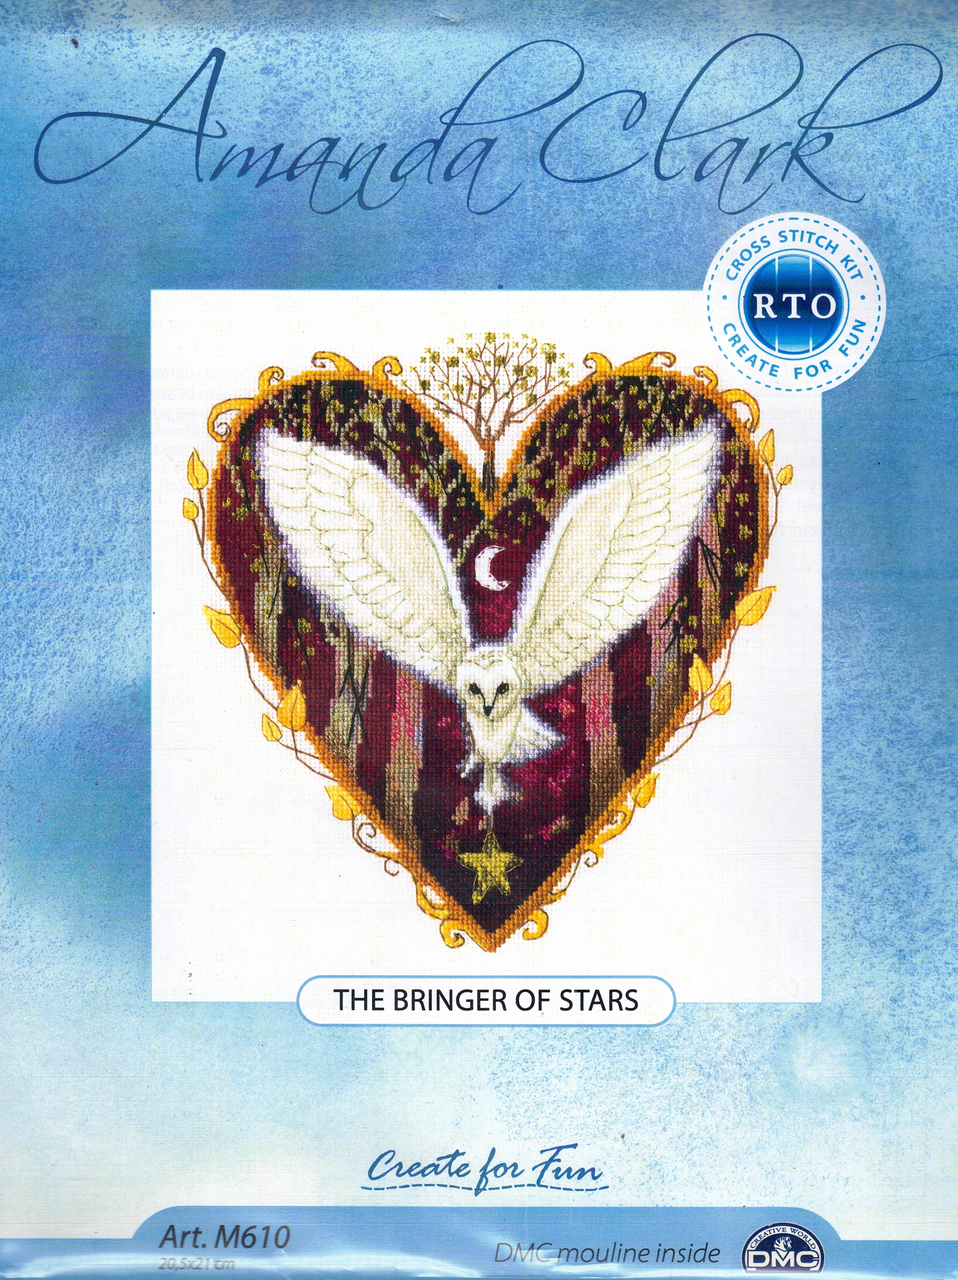 RTO Counted Cross-Stitch Kit - The Bringer of Stars Owl - by Amanda Clark